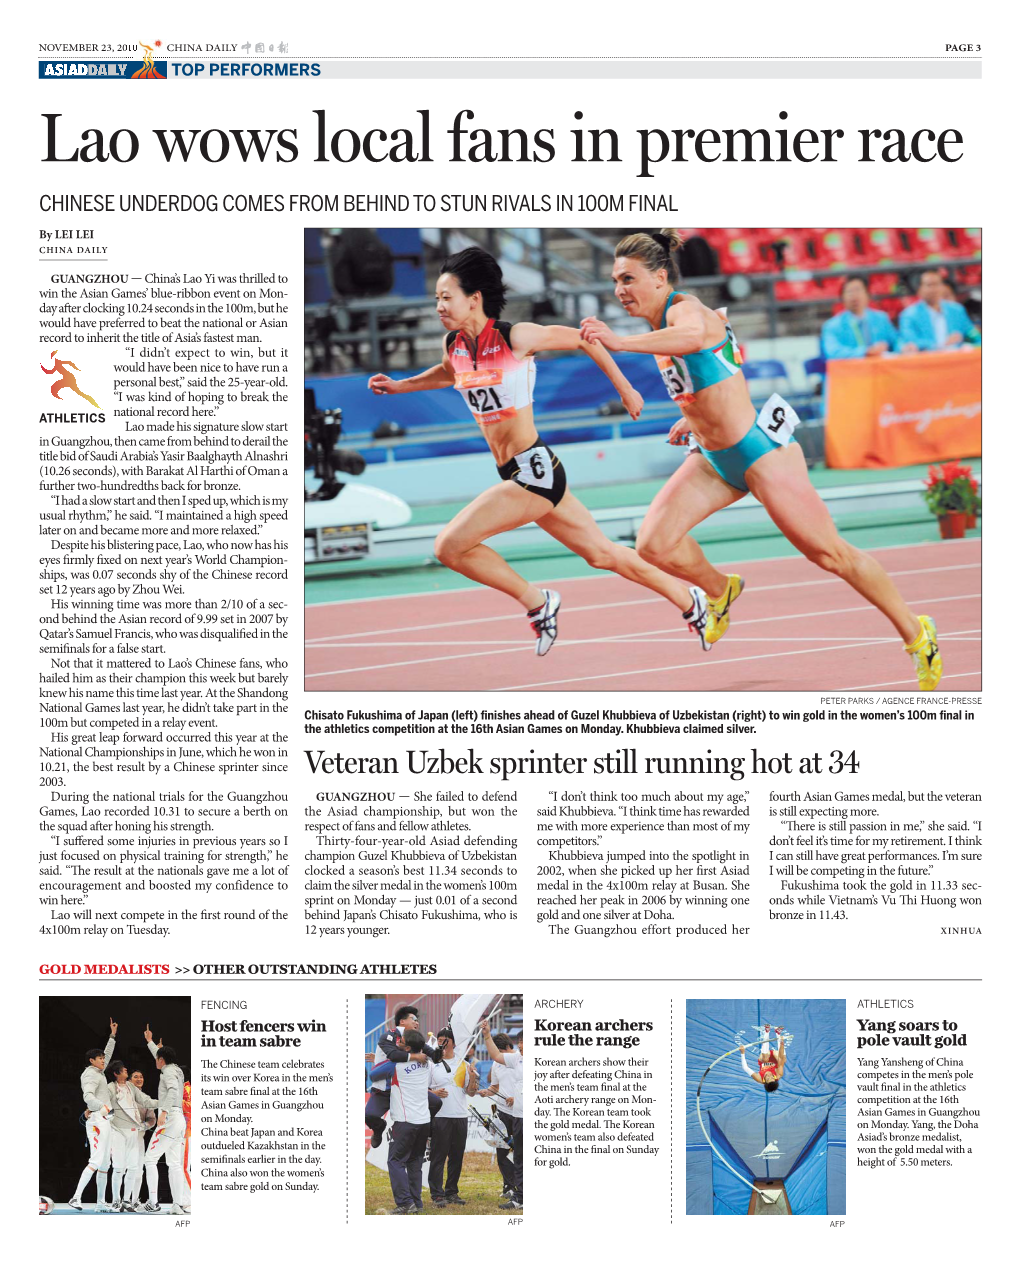 Lao Wows Local Fans in Premier Race CHINESE UNDERDOG COMES from BEHIND to STUN RIVALS in 100M FINAL